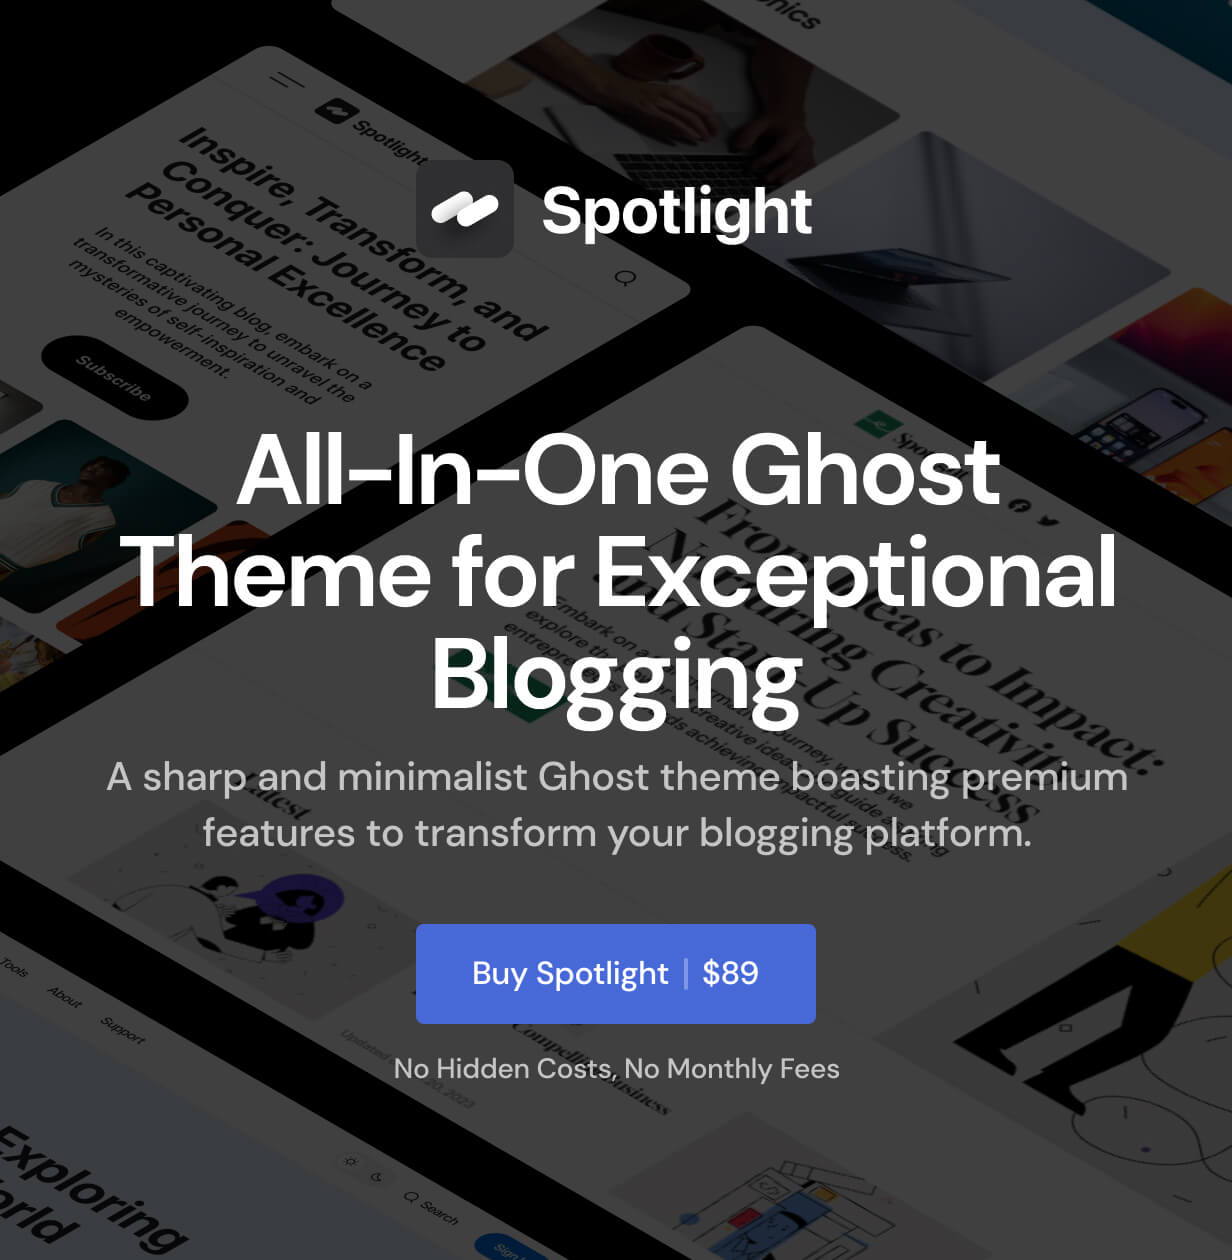 Spotlight - All-In-One Ghost Theme for Exceptional Blogging - 7